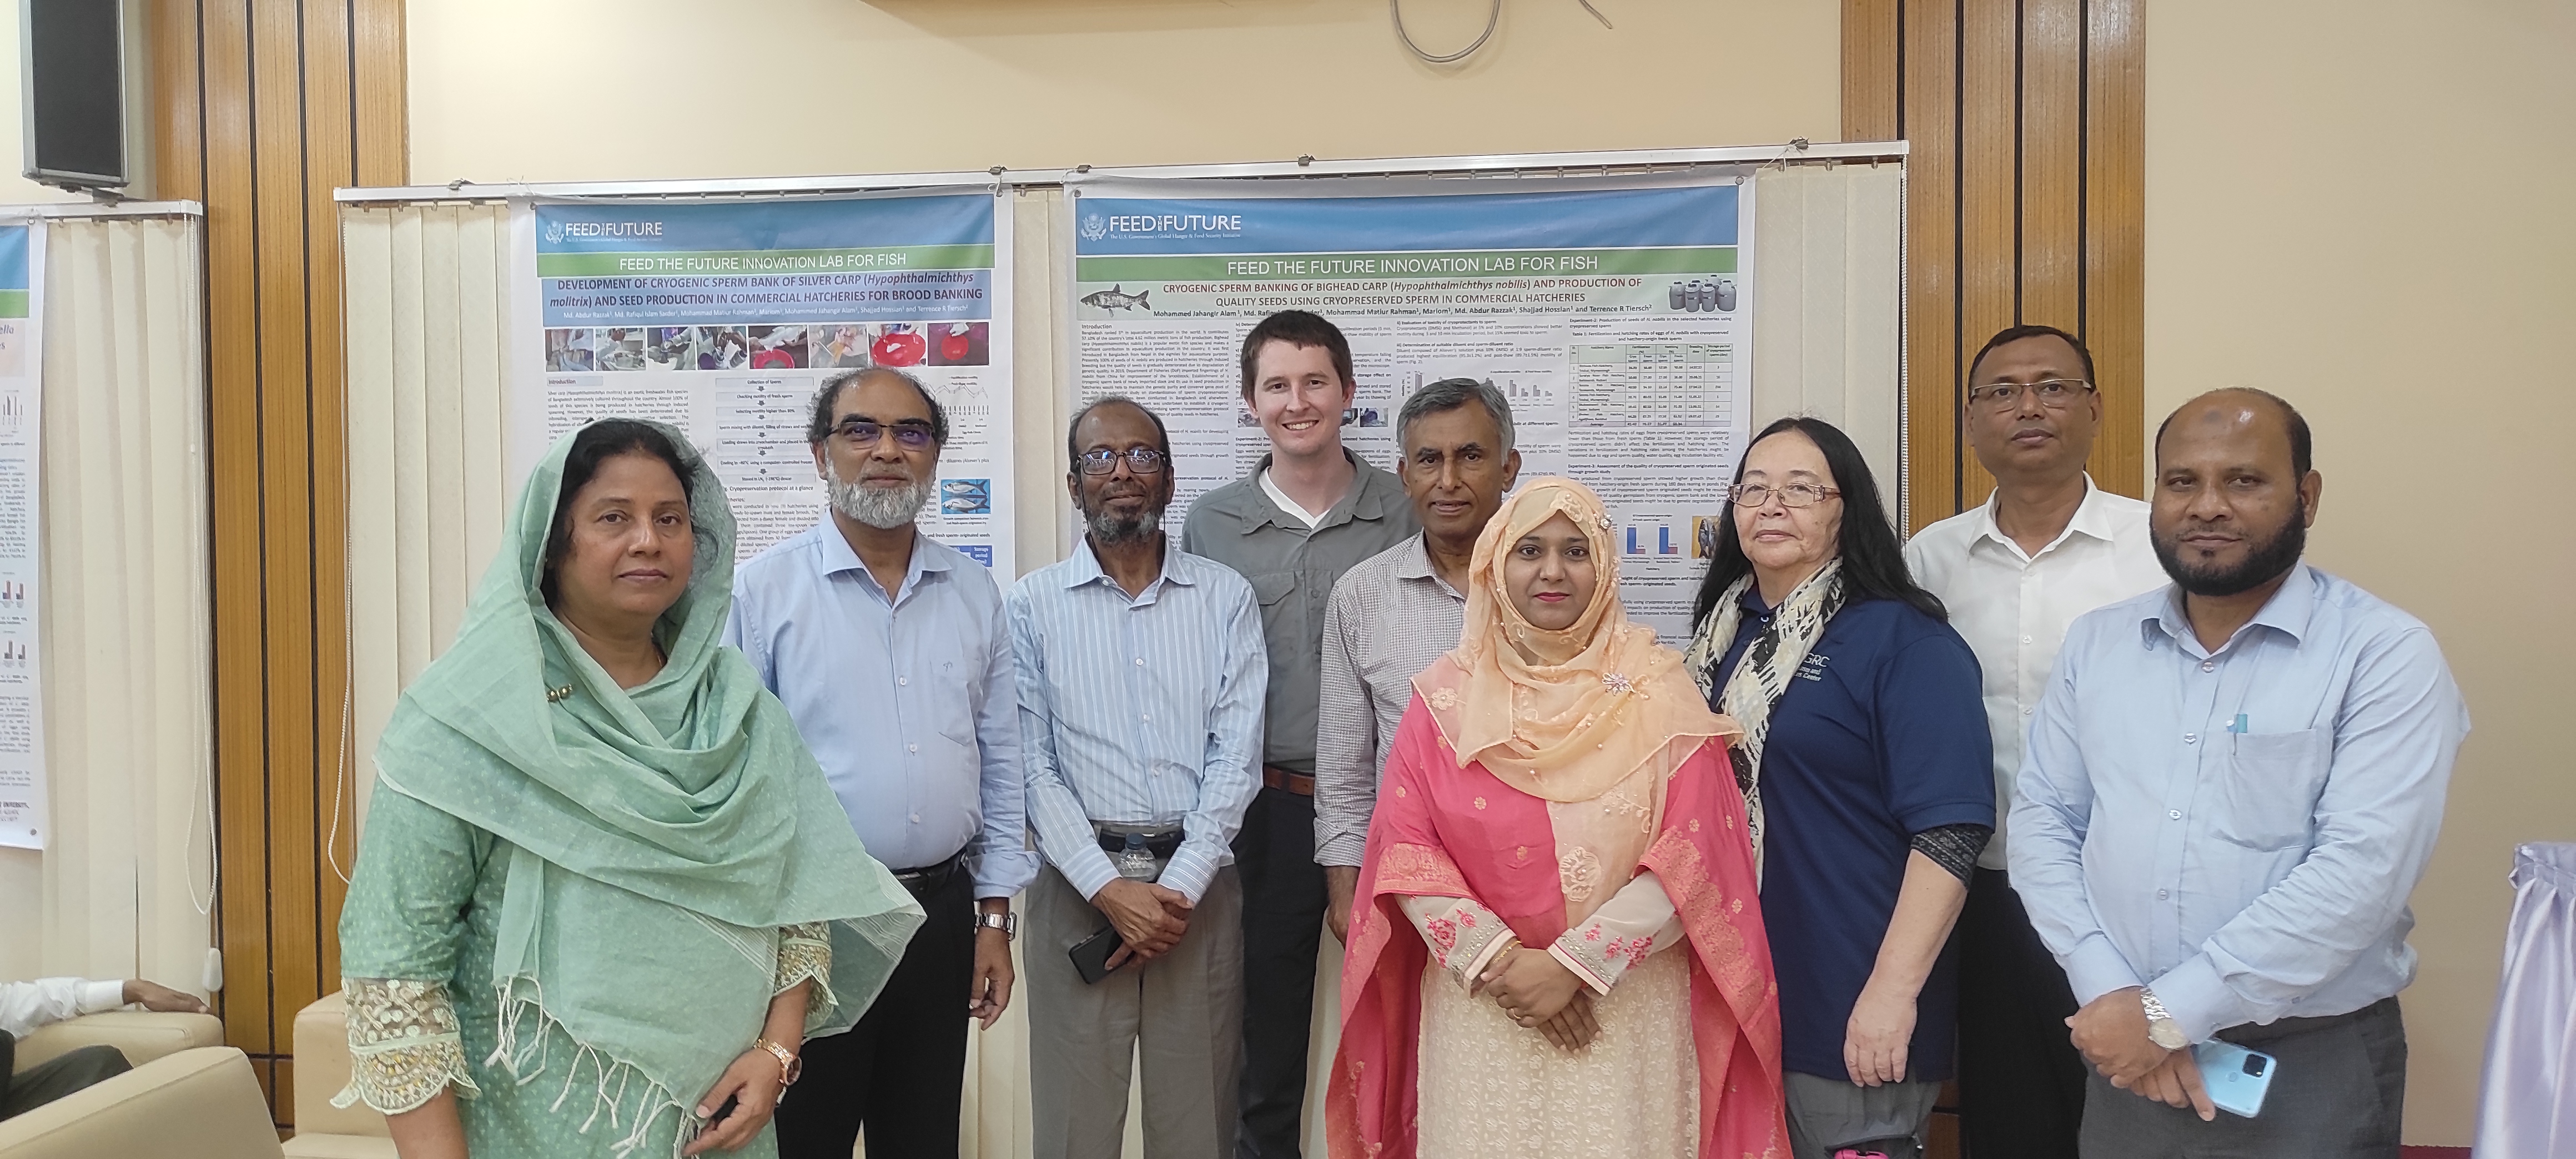 The project team with Drs. Teresa and Koch of AGGRC, Louisiana State University, USA at workshop venue.